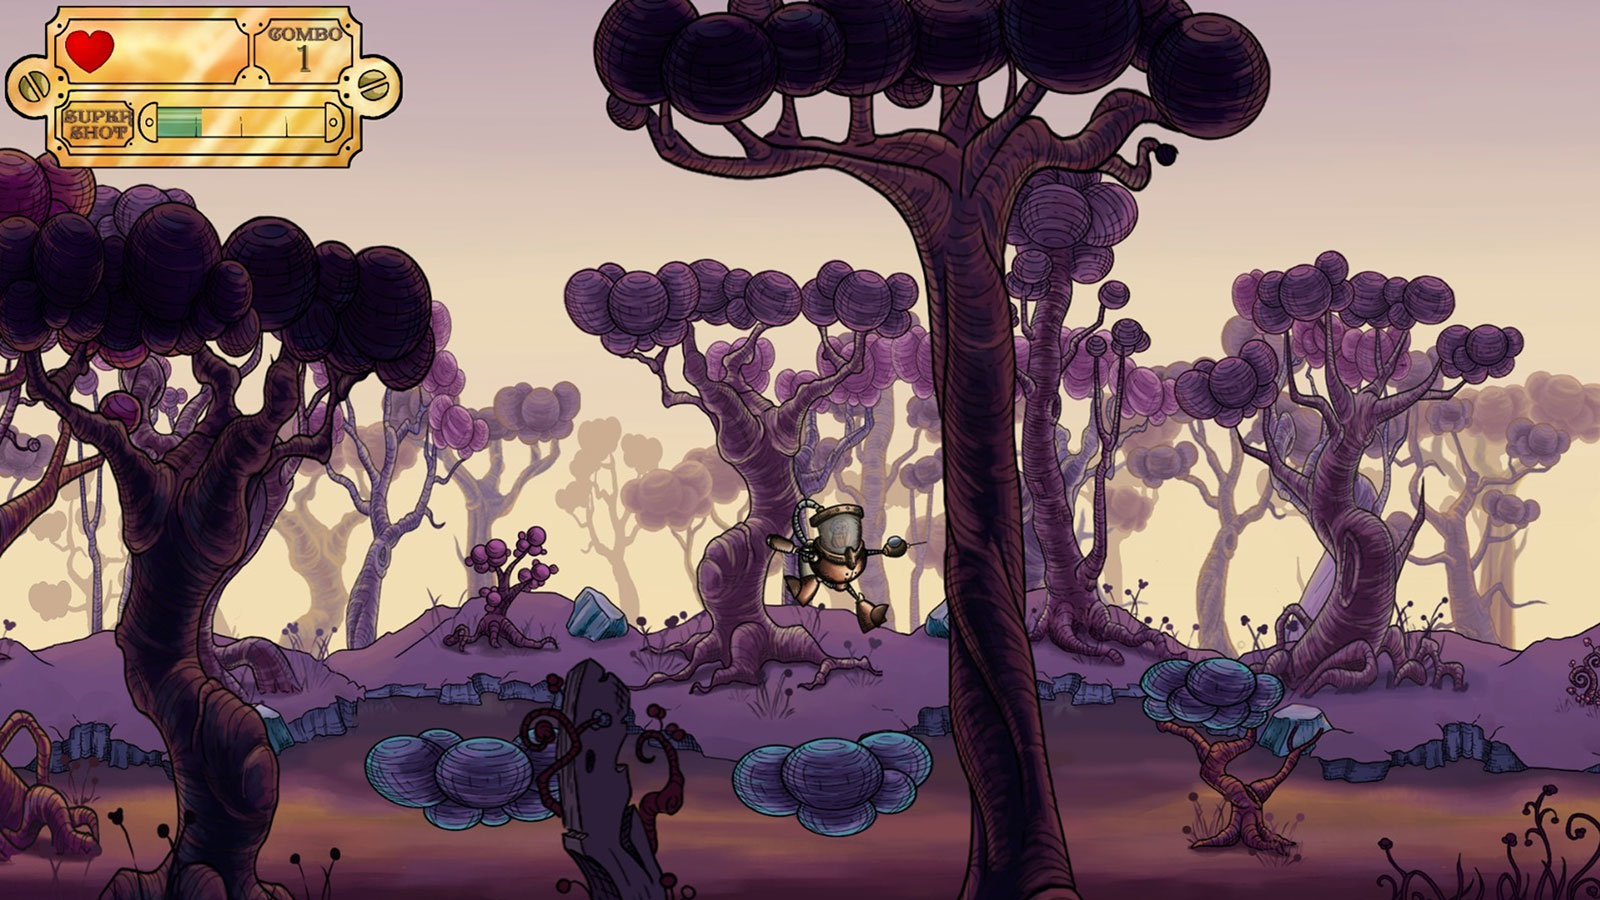 Player jumping between small bubble platforms with large purple trees in the fore and backgrounds